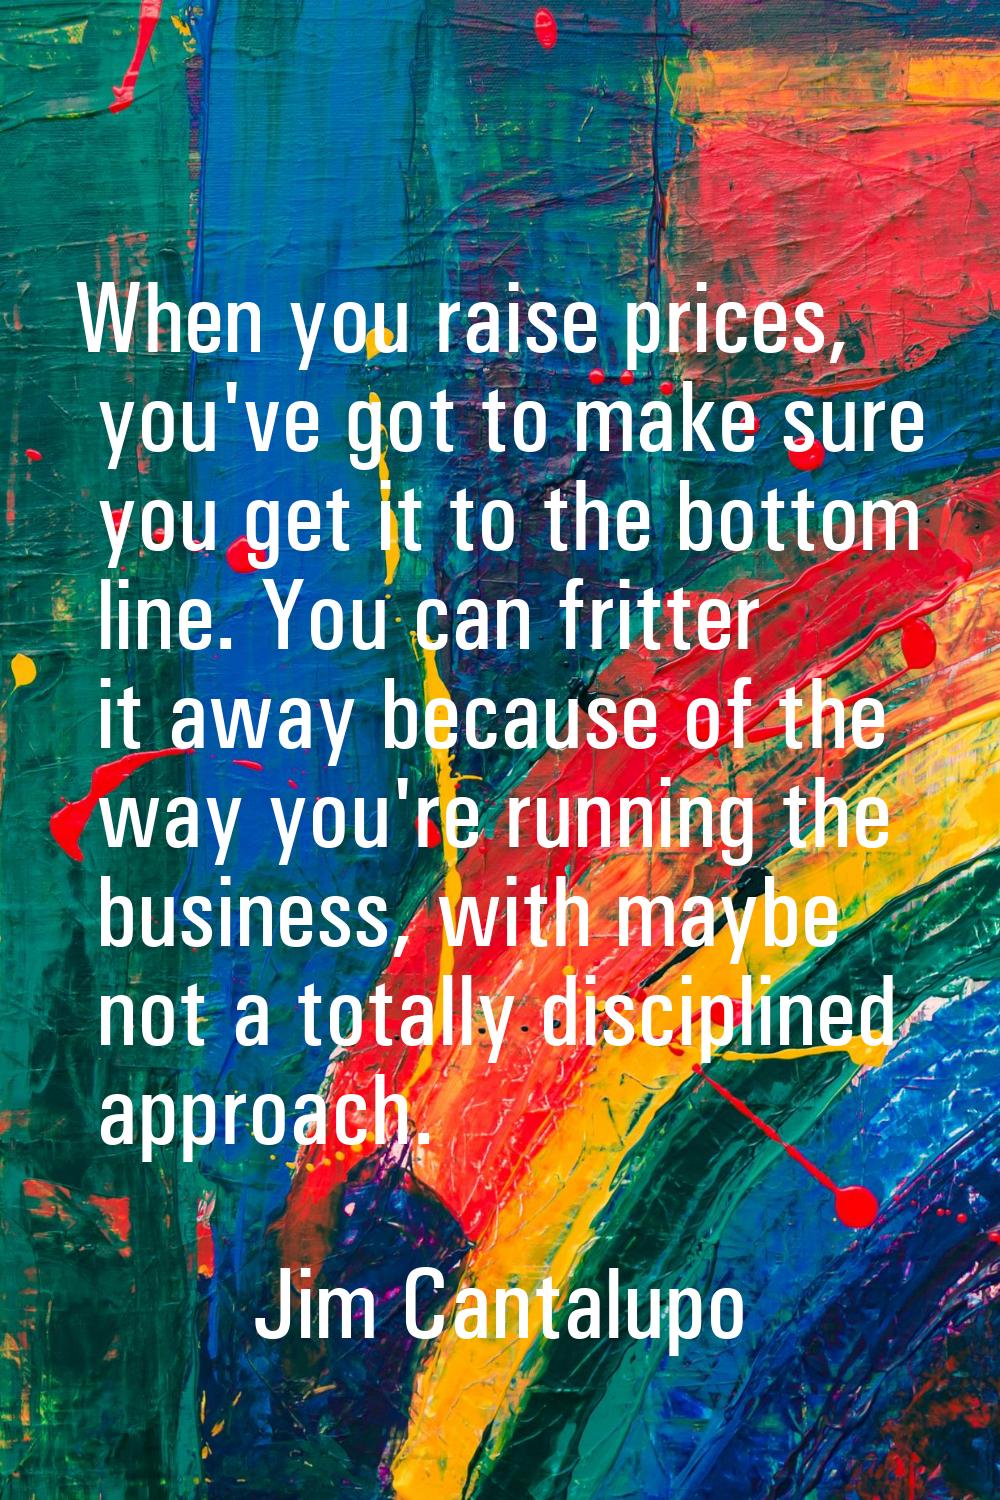 When you raise prices, you've got to make sure you get it to the bottom line. You can fritter it aw